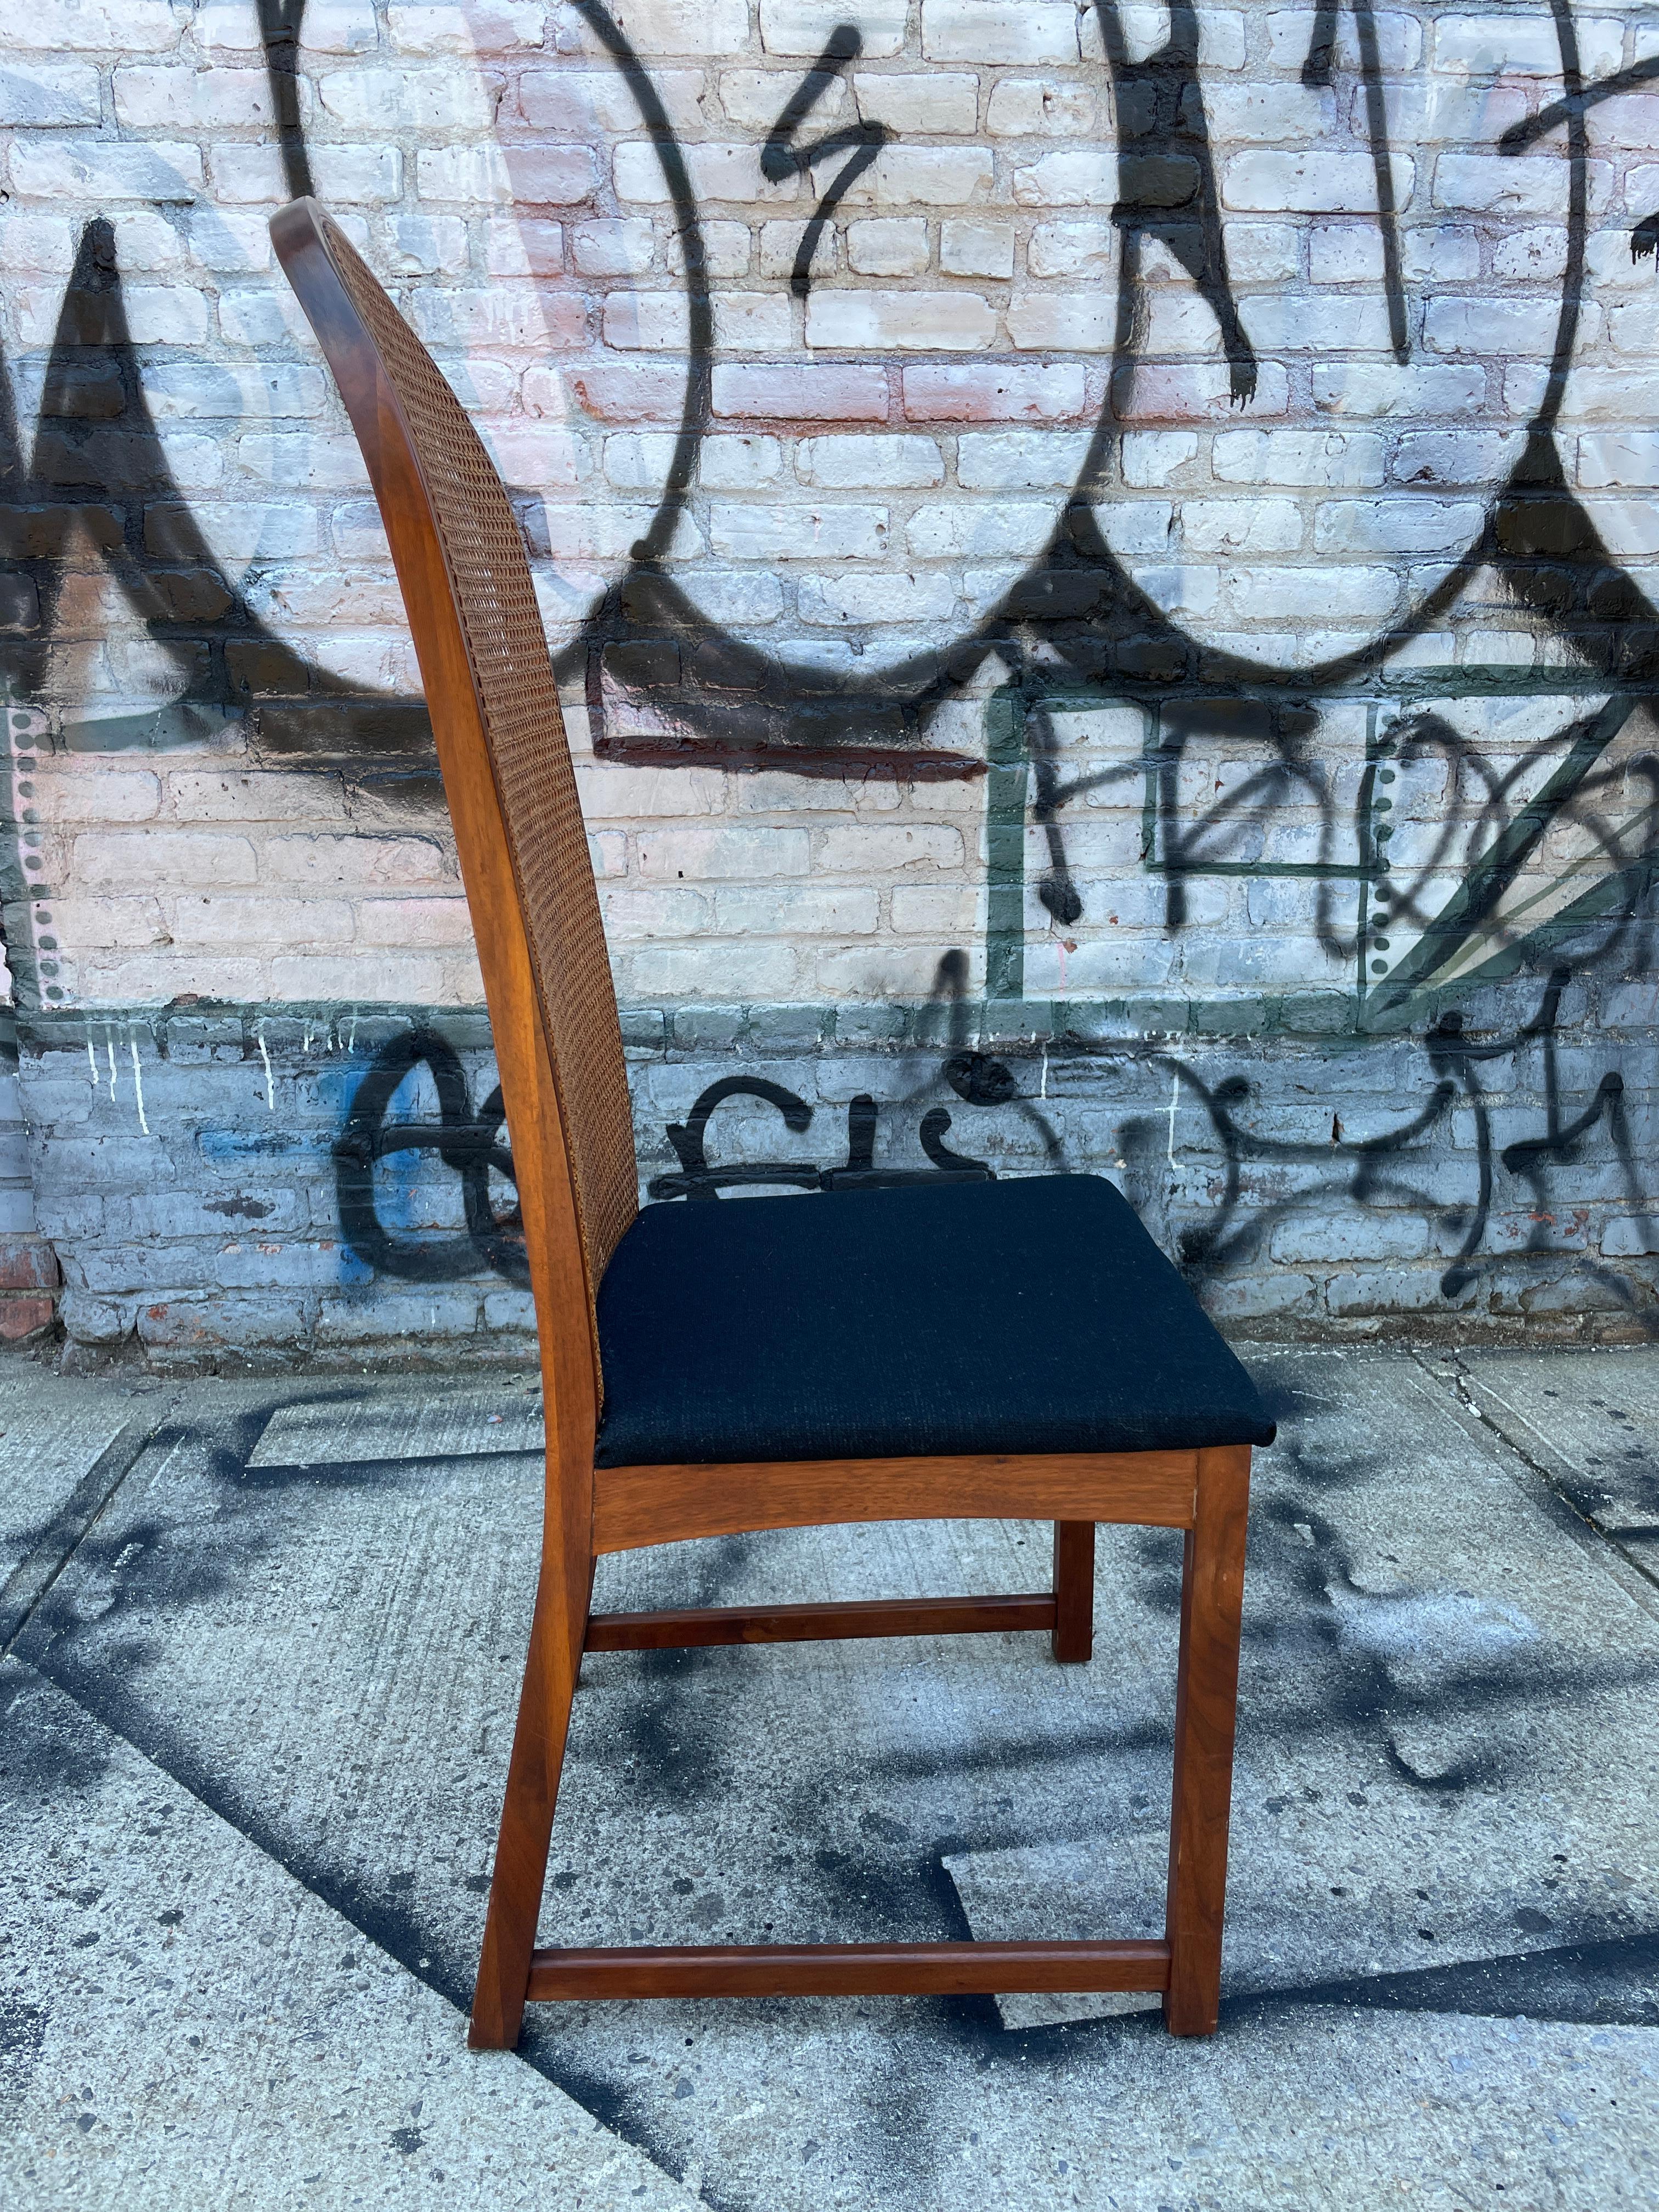 BeautifulMilo Baughman high curved back cane dining chairs. Chairs have no arms and have all the same black upholstery. Beautiful simple design very comfortable. Very easy to reupholster in your choose of fabric. Cane is in great vintage condition.